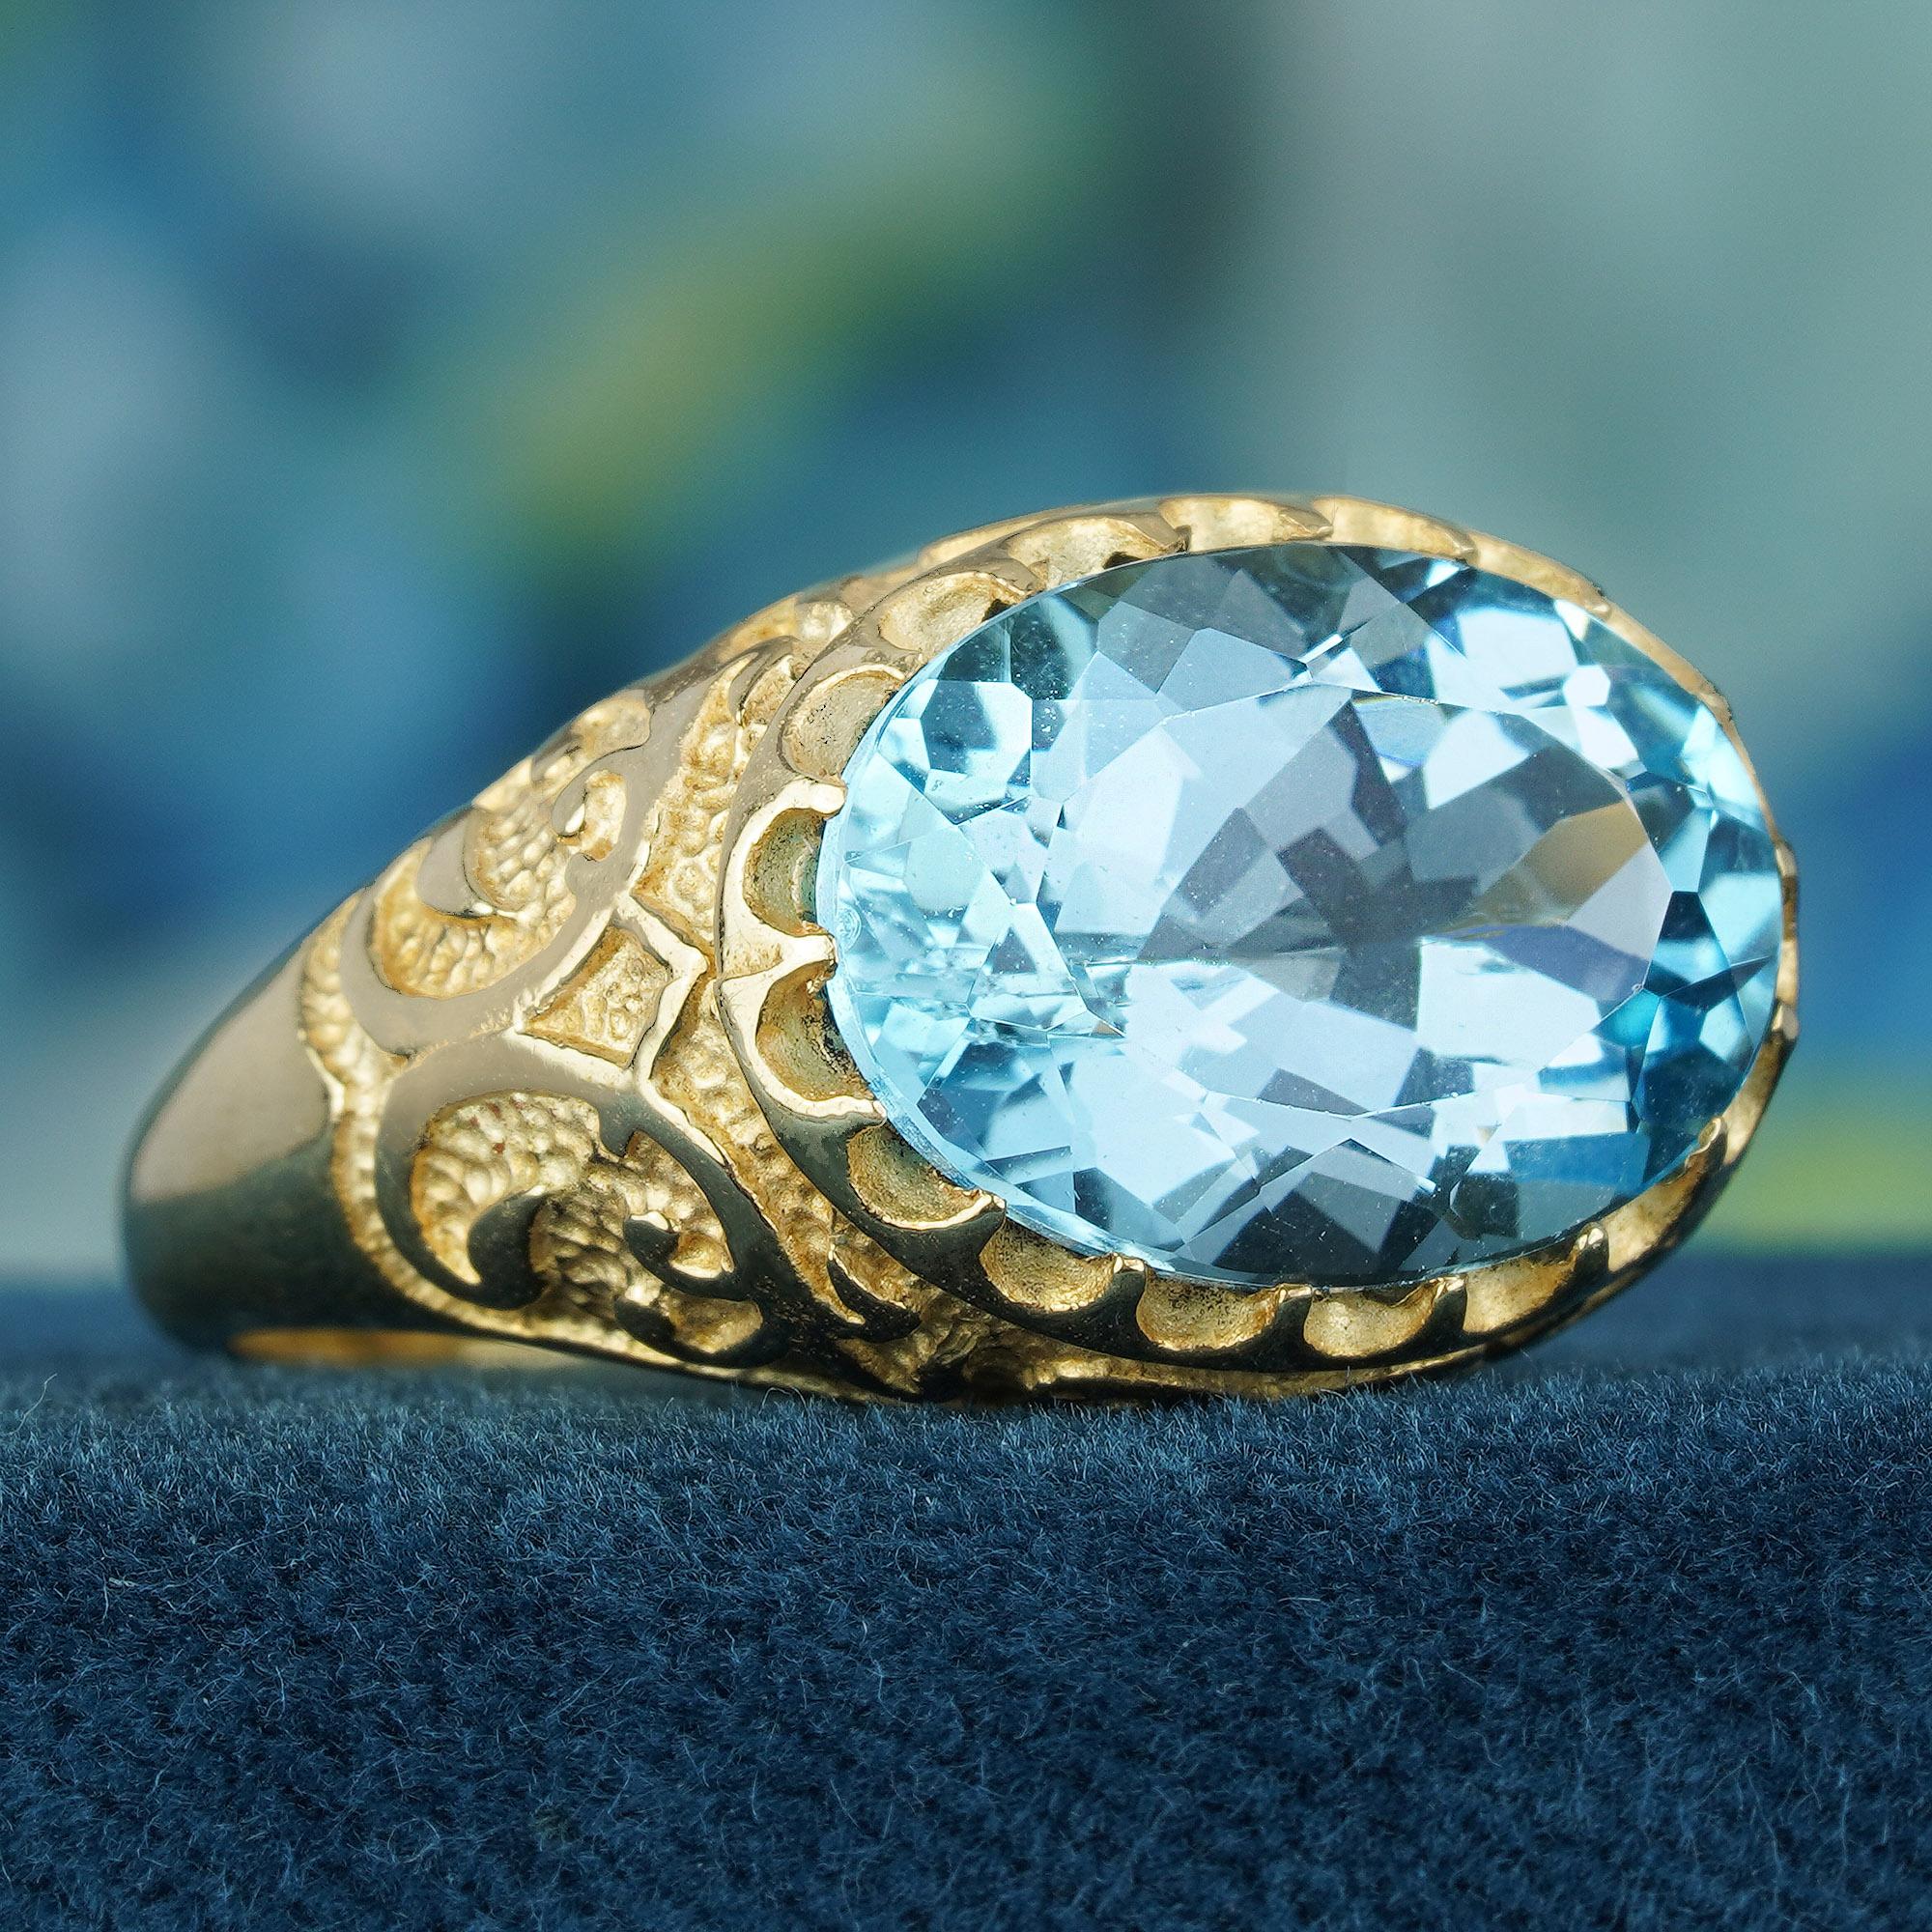 Nestled within a solid yellow gold band, the 7.25 carat oval-shaped sky blue topaz is securely set amidst intricate detailing and vintage-inspired designs carved into the metal, imparting a vintage charm to the ring. The patterns pay homage to